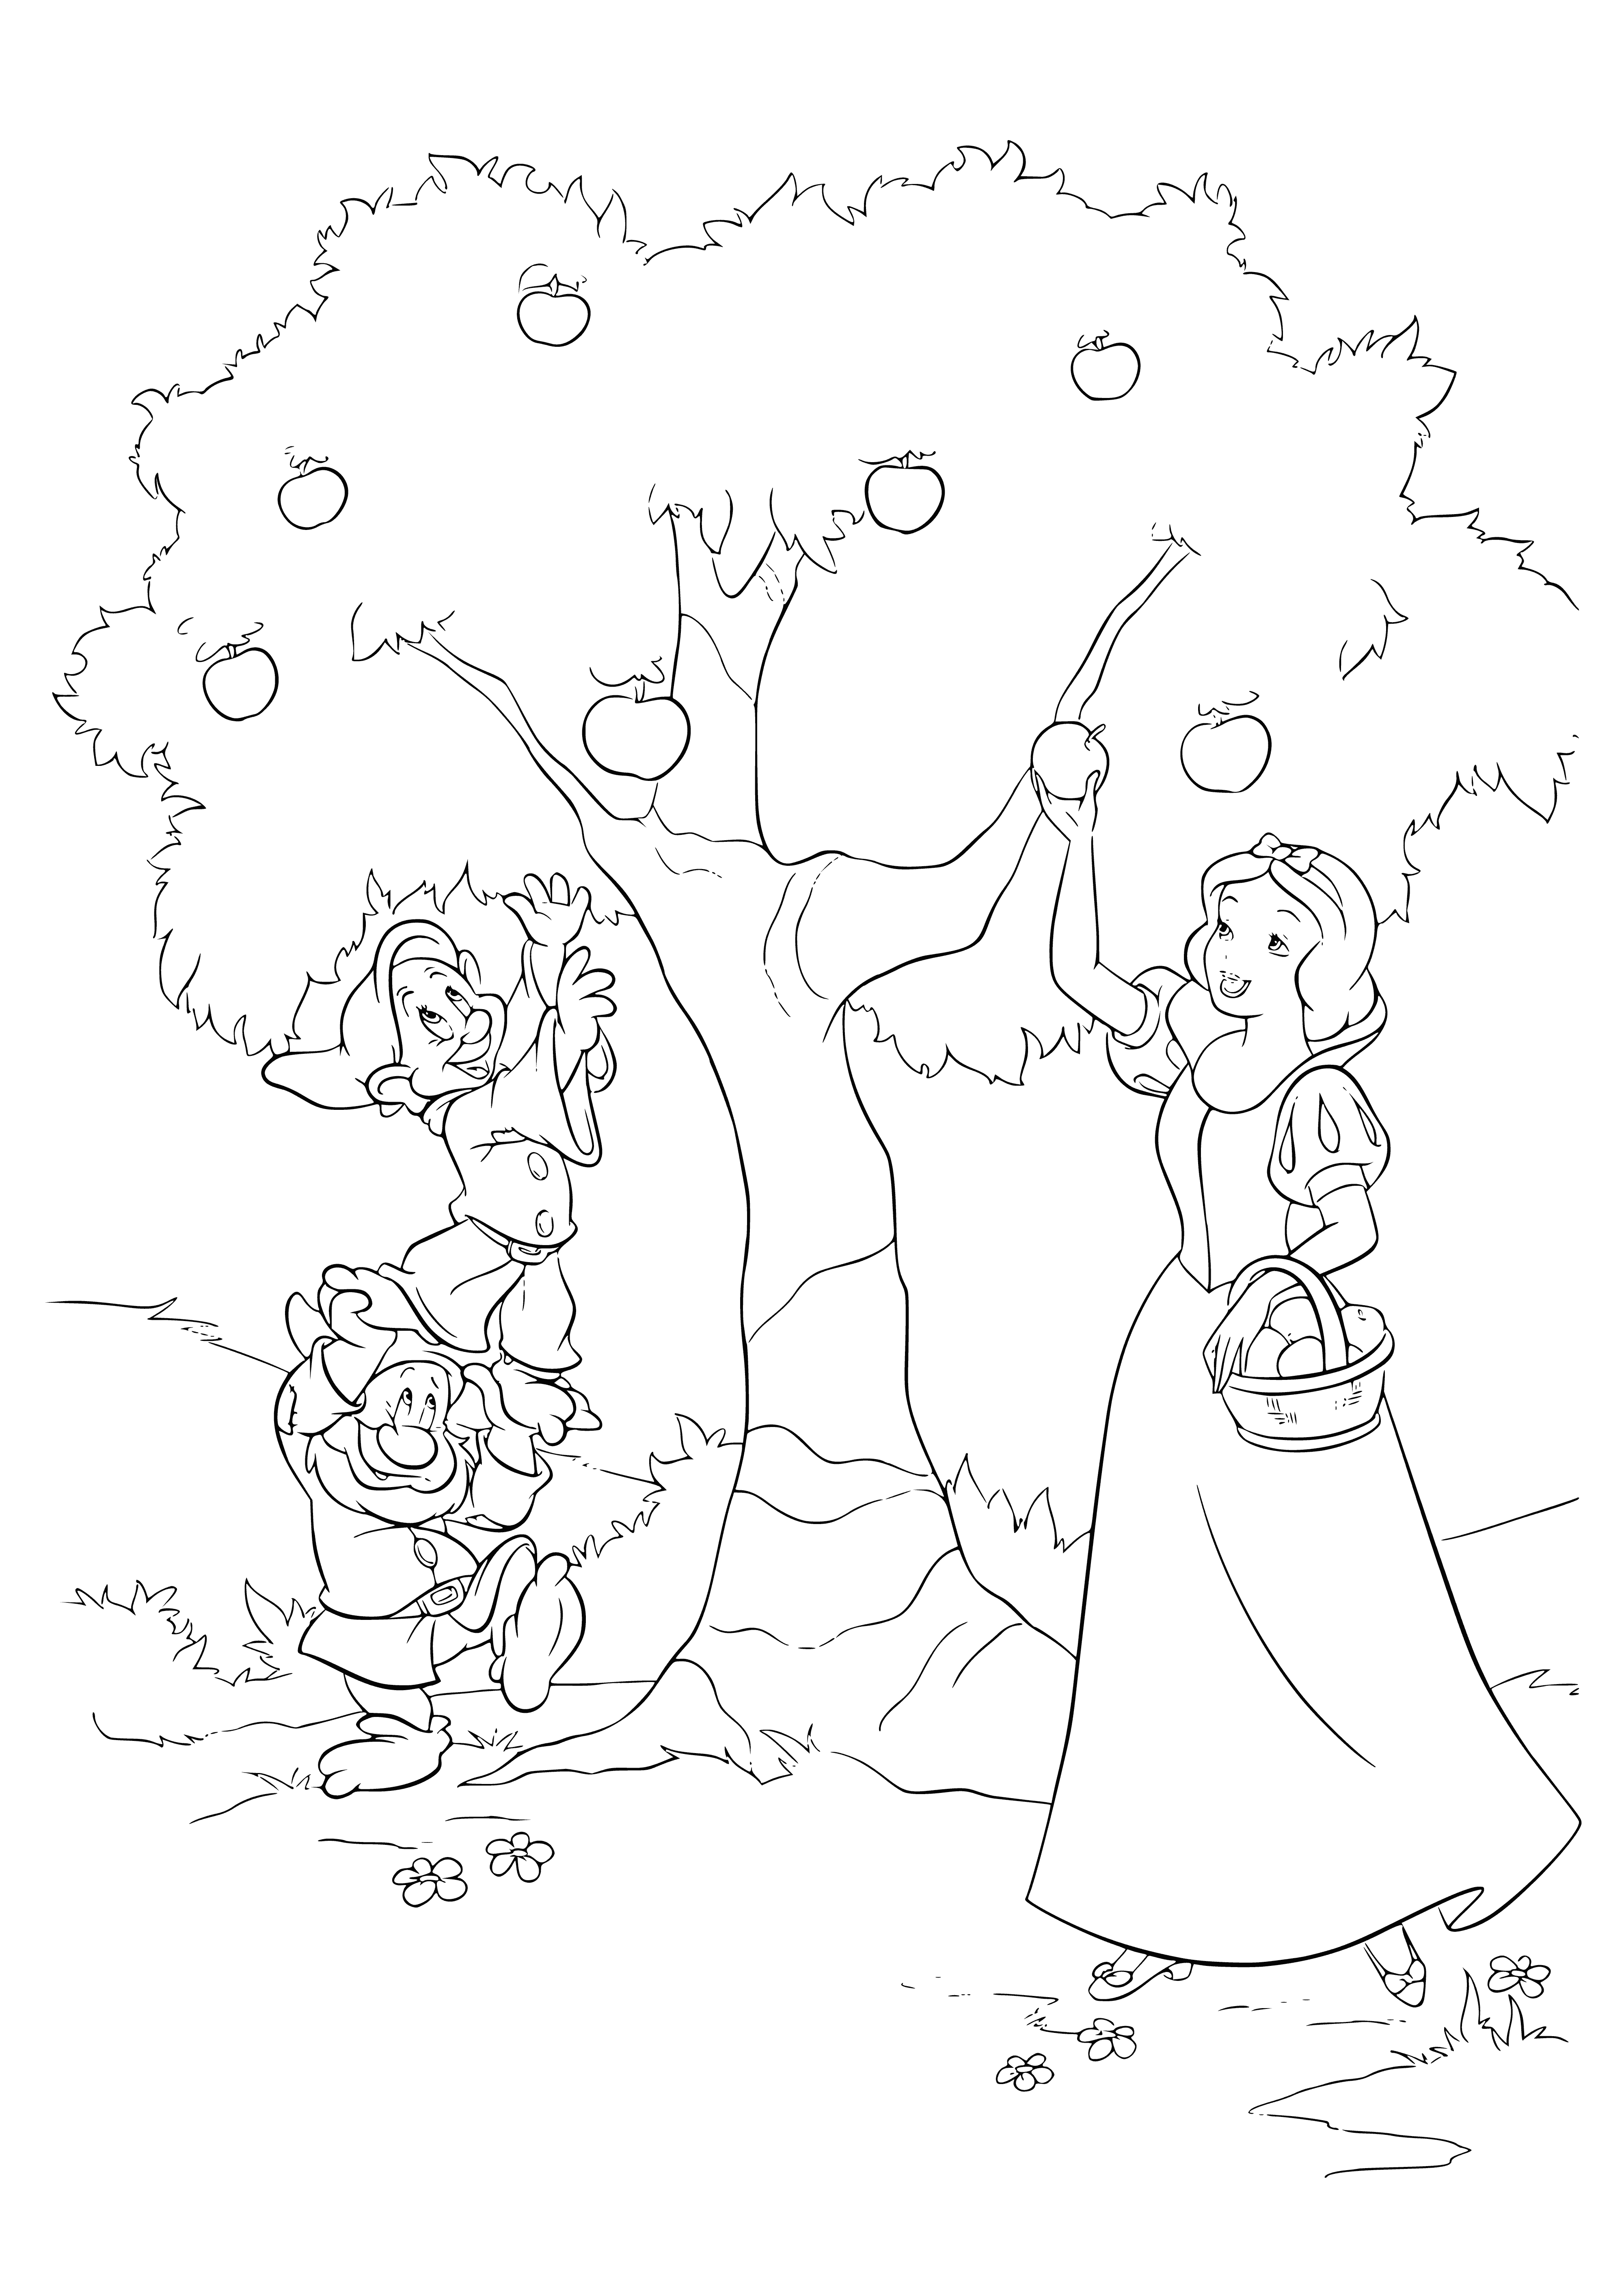 coloring page: Snow White stands in a forest clearing holding a basket & apple. Behind her are 7 dwarves in red shirts & brown pants, with different colored hair.